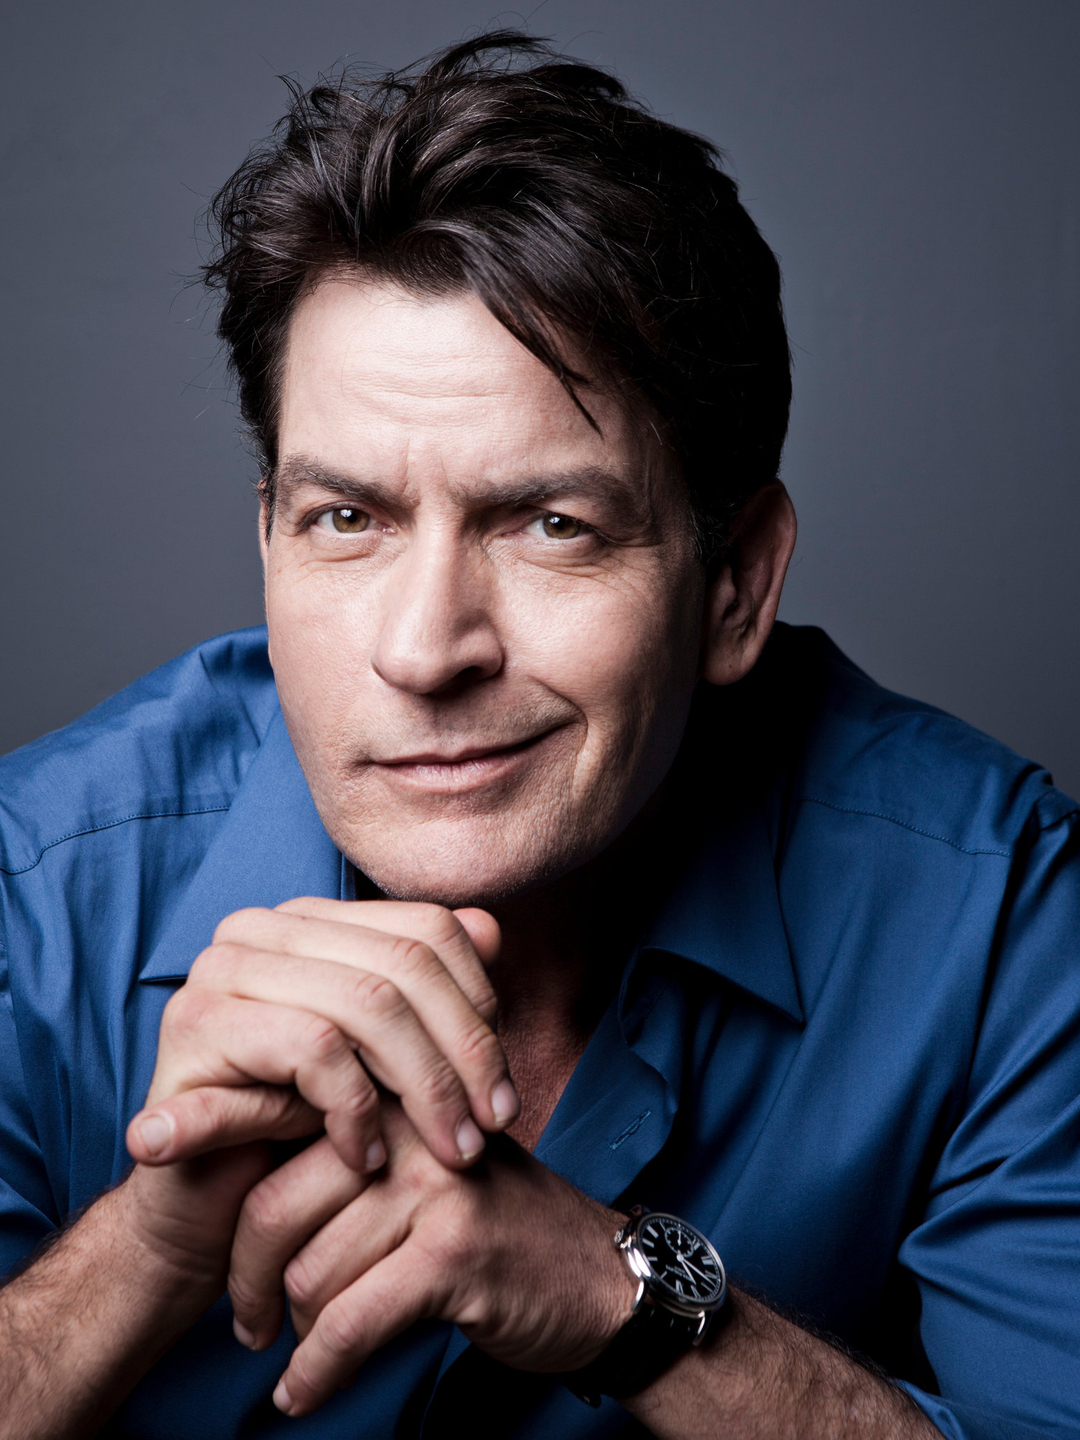 Charlie Sheen dating history